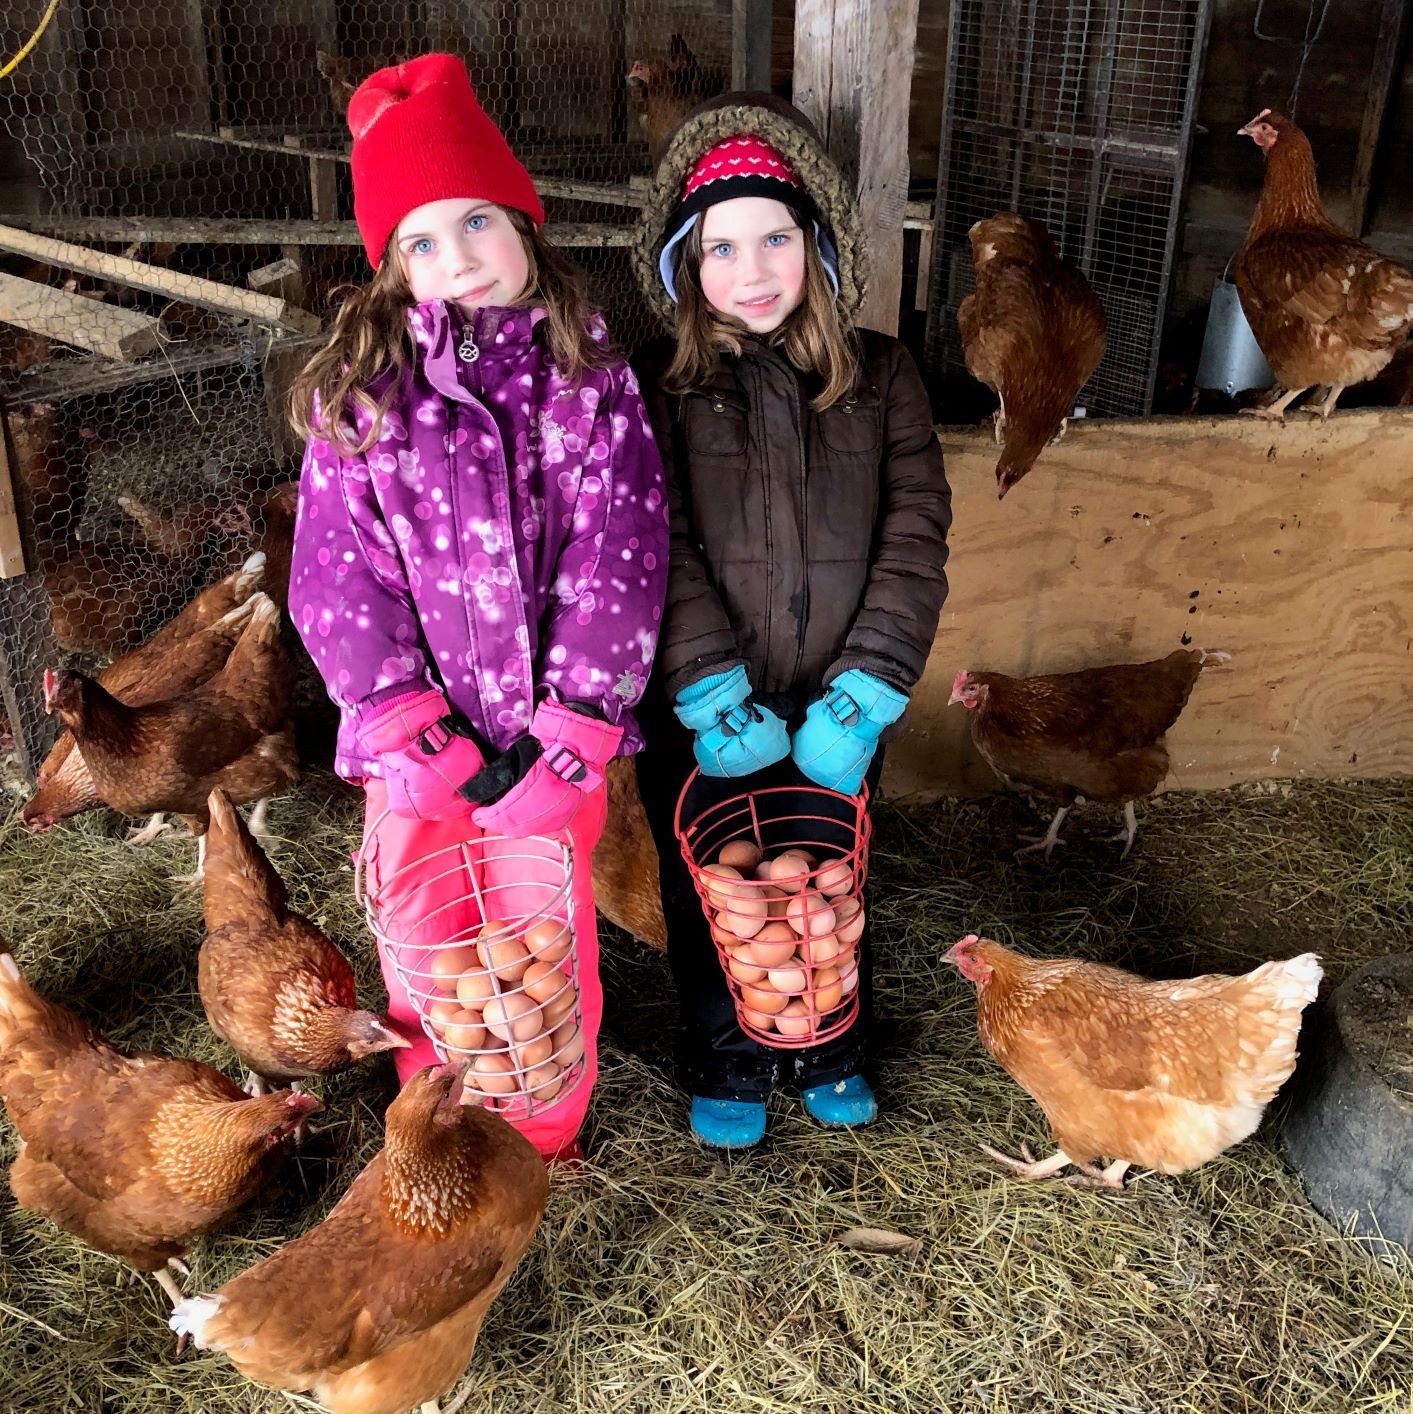 Next Happening: Farm Happenings for March, 20, 2019: the LAST Winter CSA Pick Up!